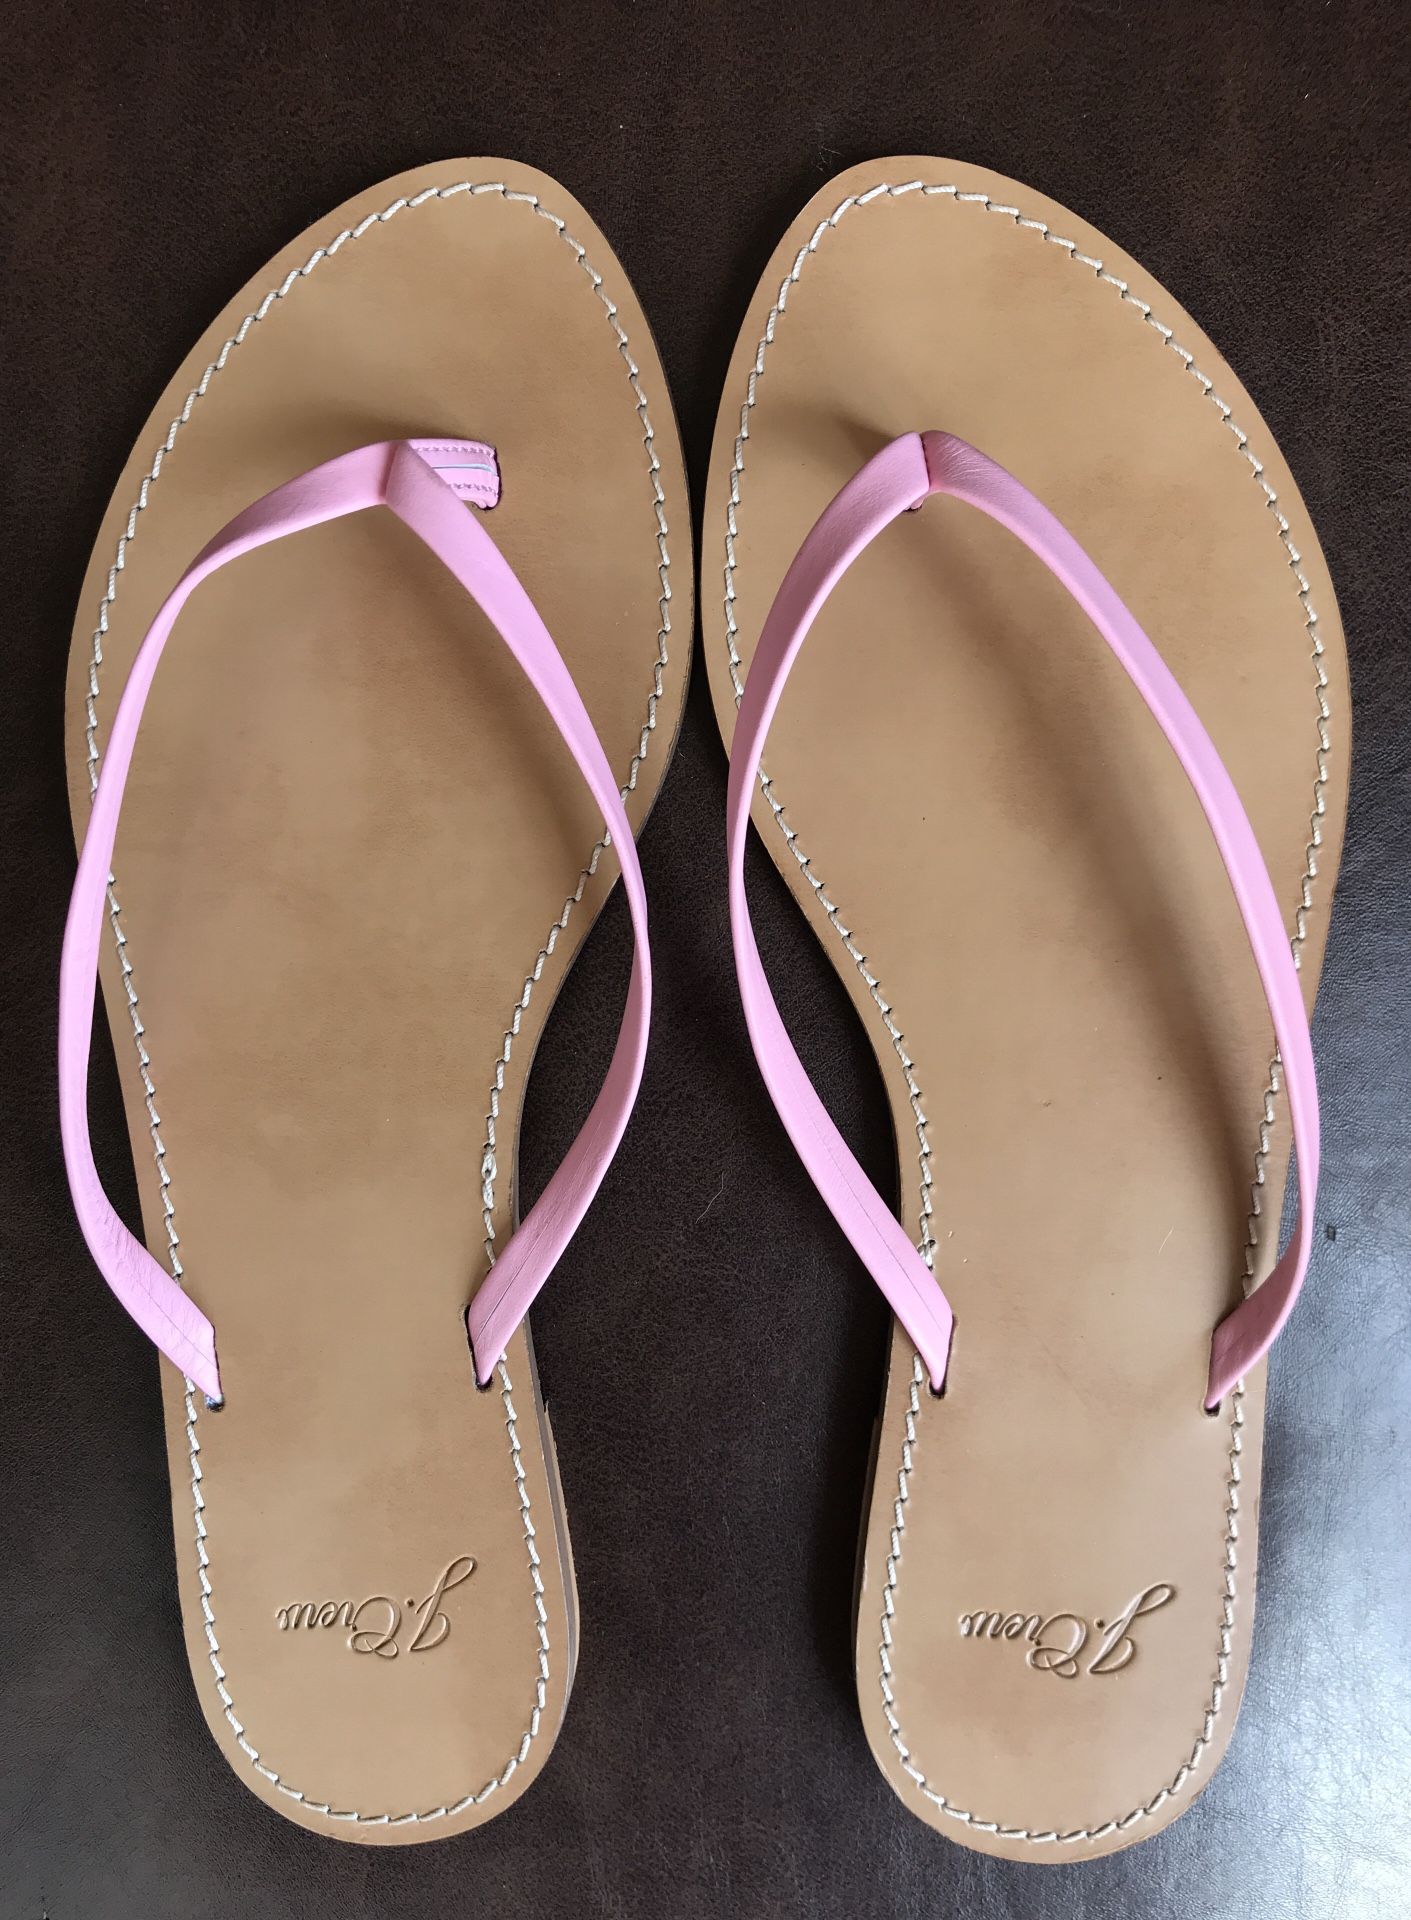 (NEW) (1 AVAILABLE) WOMEN’S J.CREW COOL PINK CAPRI SANDALS IN LEATHER - SIZE: 8 1/2 (MSRP: $58)